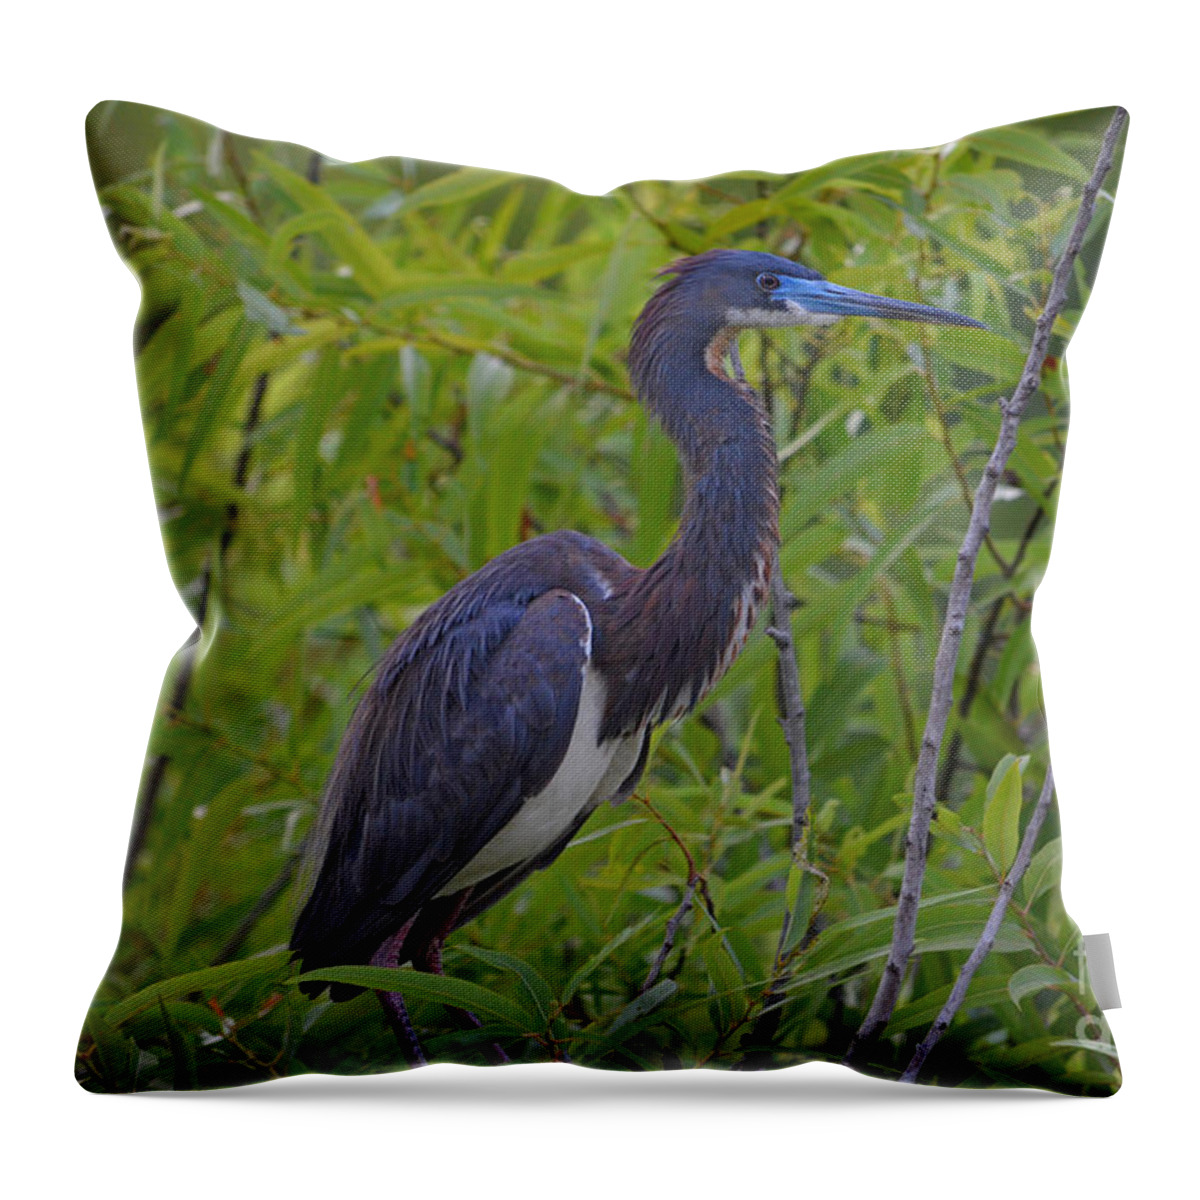 Tri-colored Heron Throw Pillow featuring the photograph 13- Tri-Colored Heron by Joseph Keane